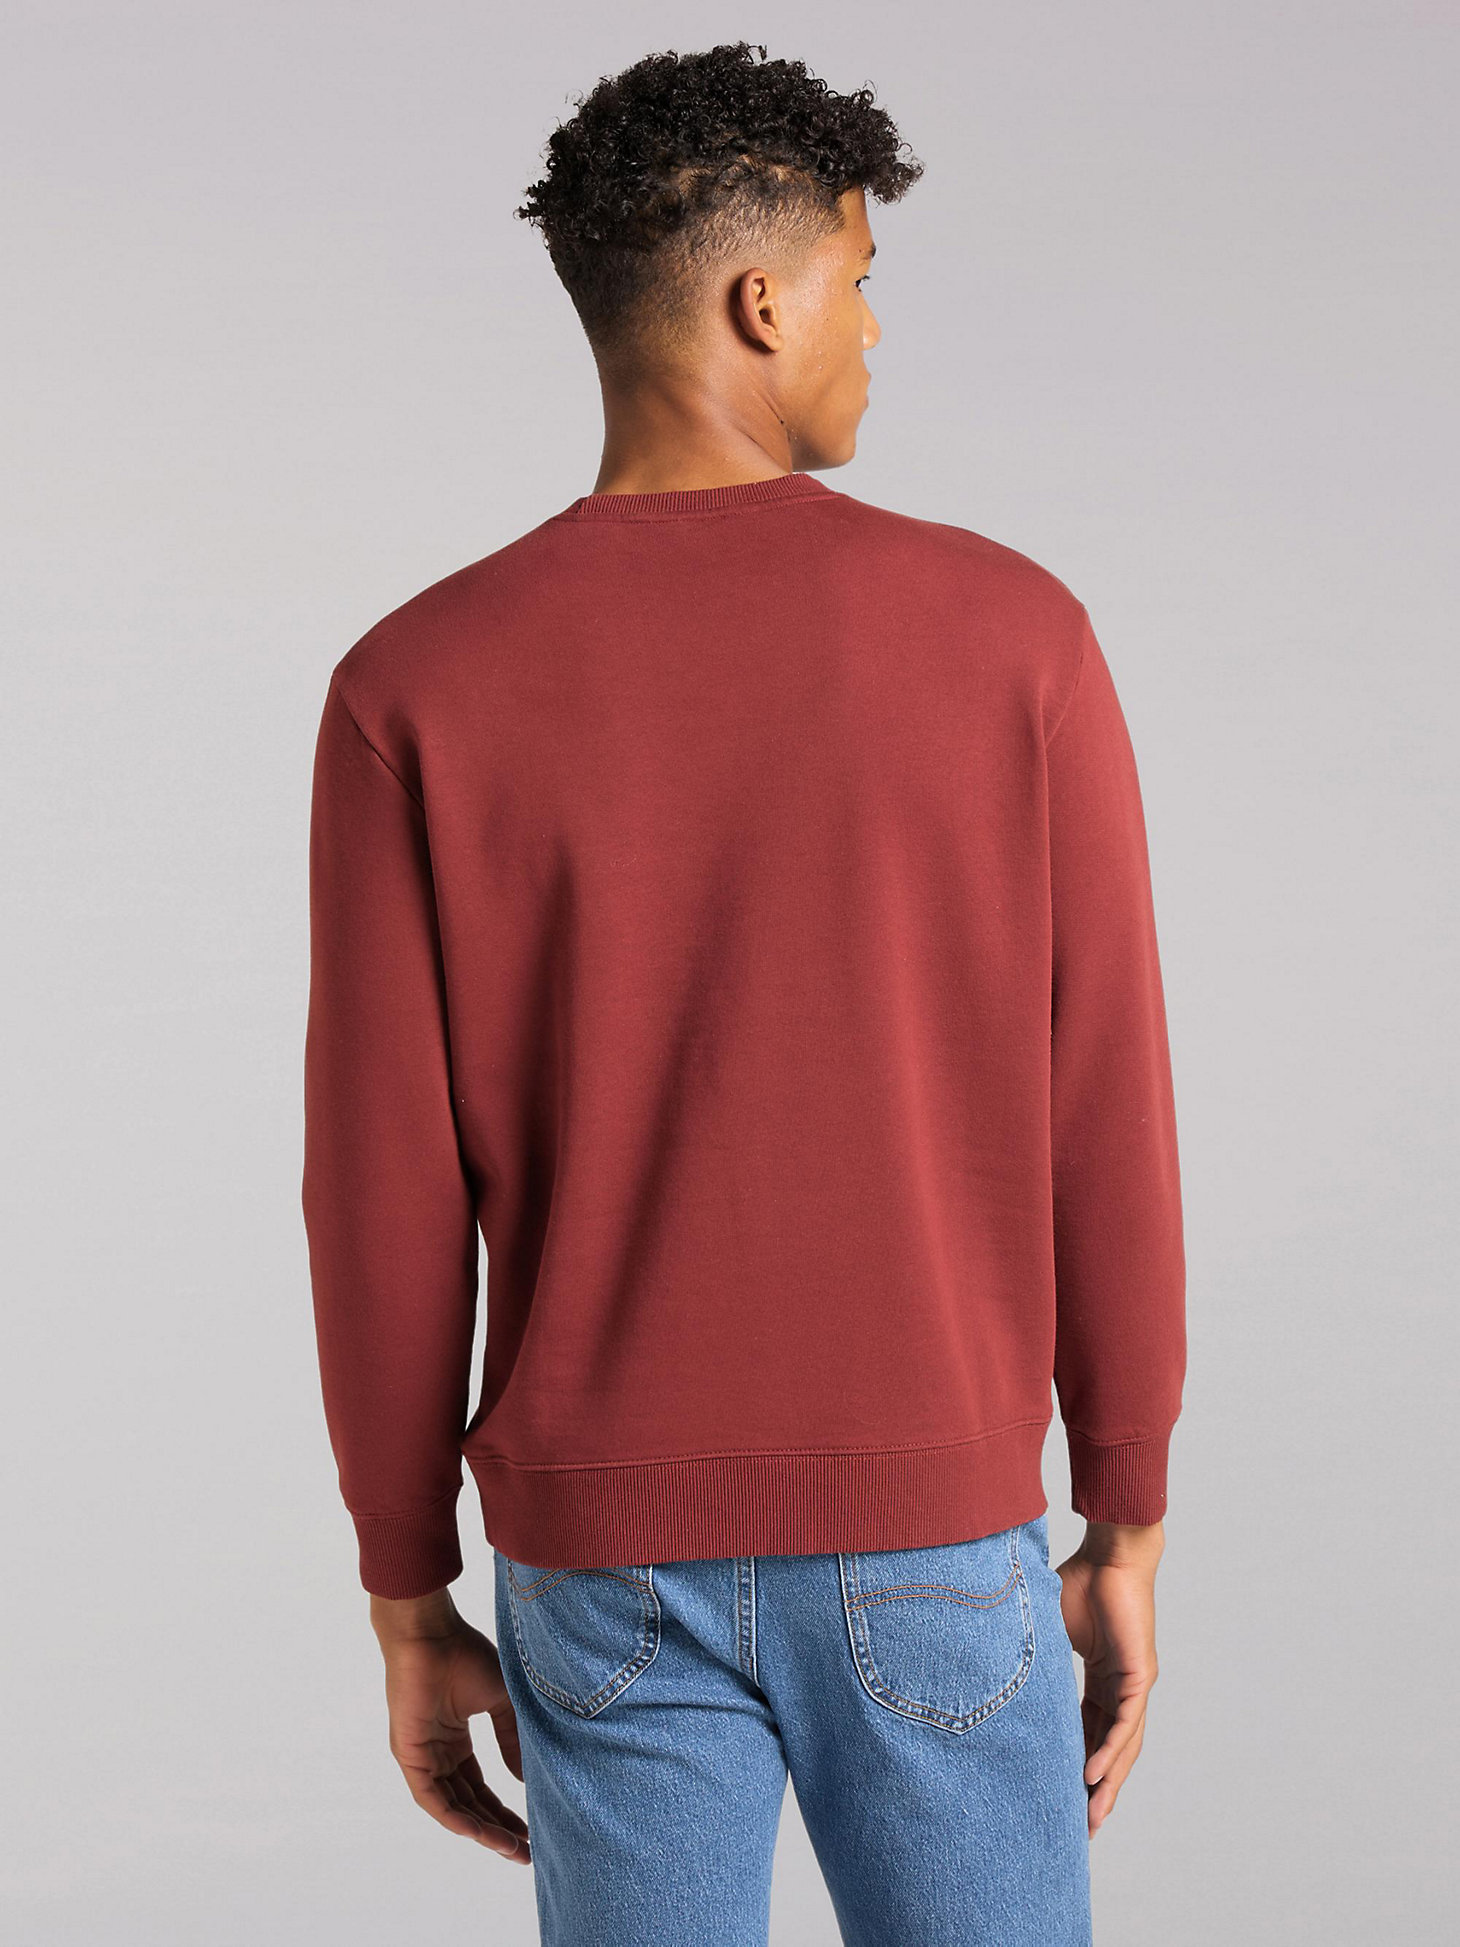 Men's Lee European Collection Can't Bust 'Em Rooster Sweatshirt in Fired Brick alternative view 1